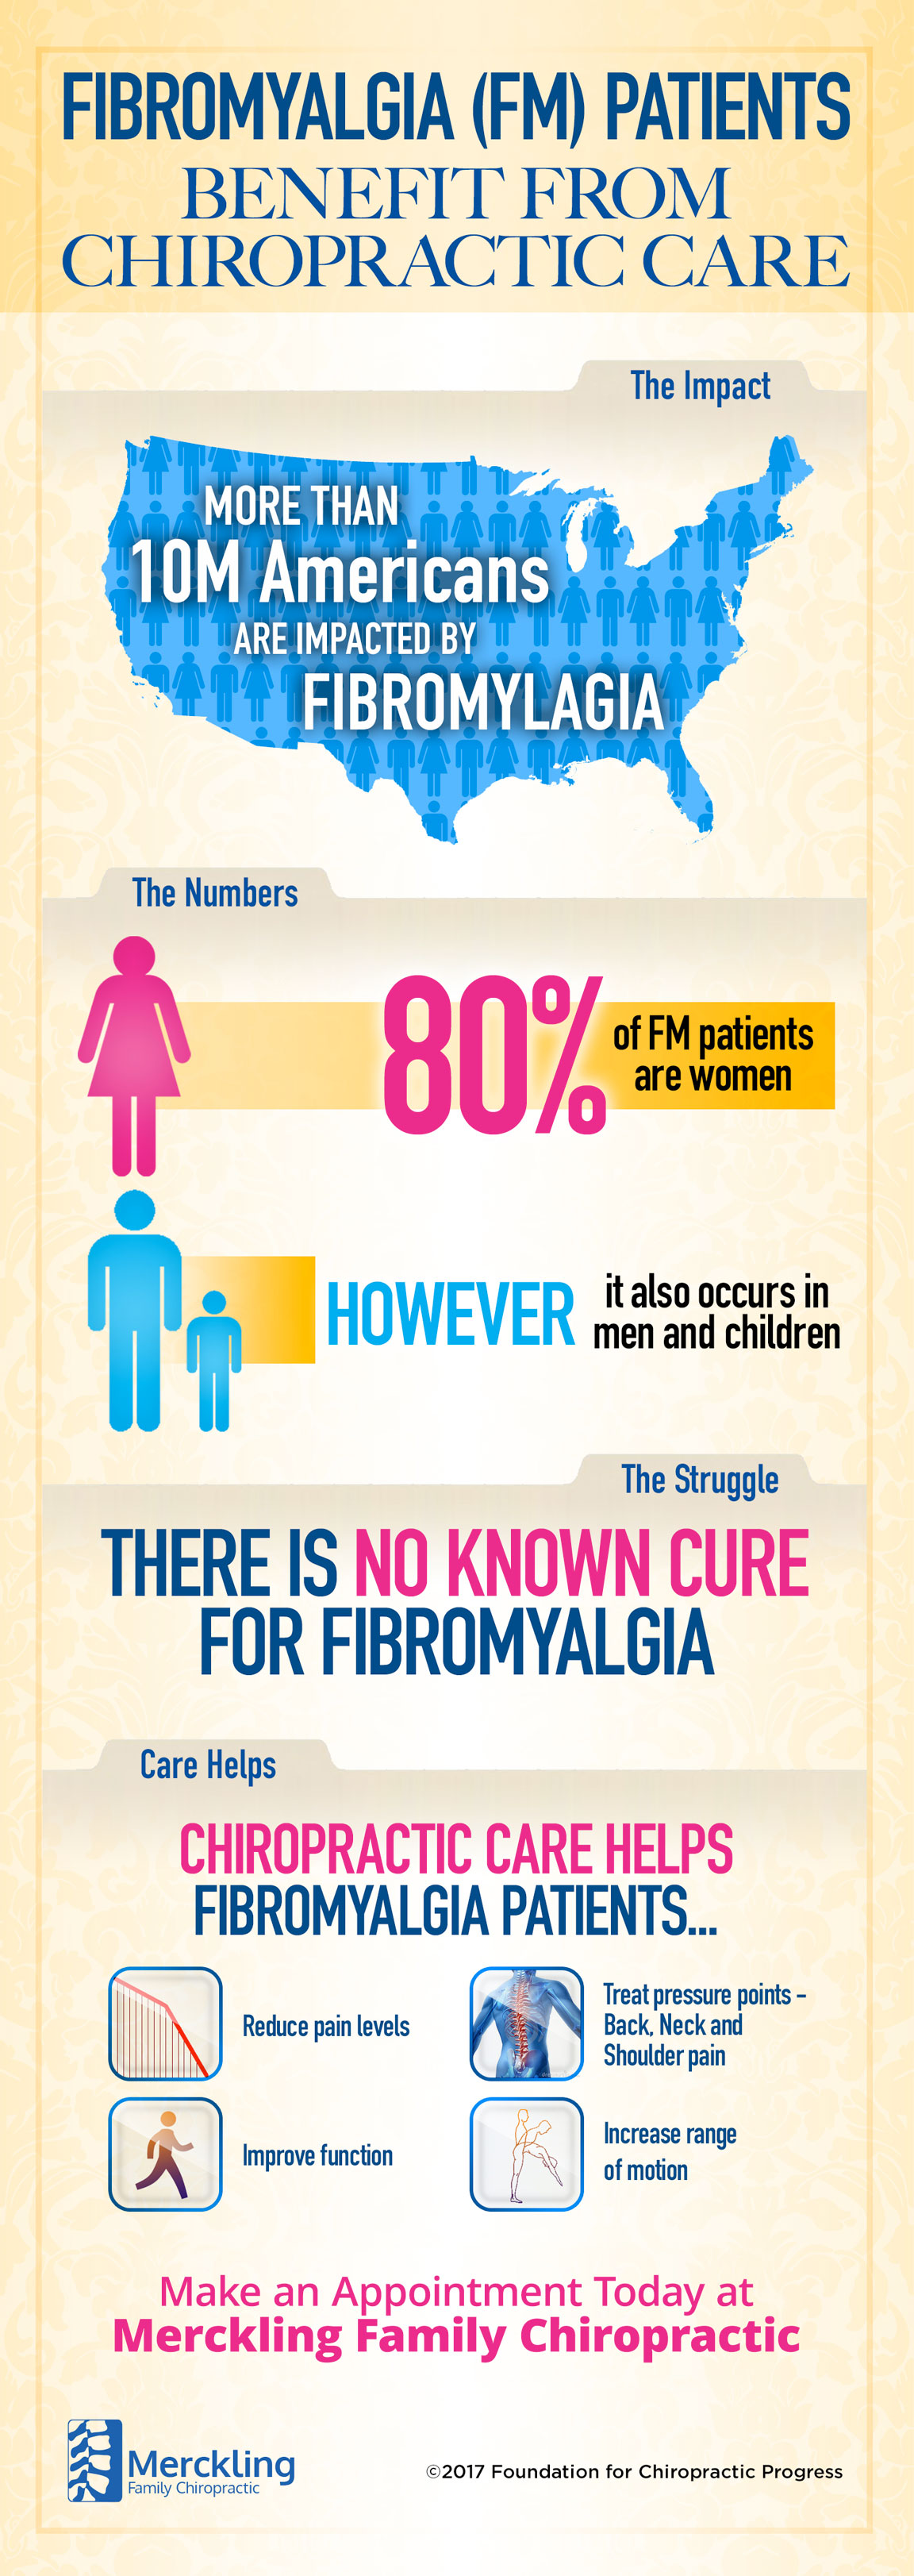 Fibromyalgia Patients Benefit from Chiropractic Care